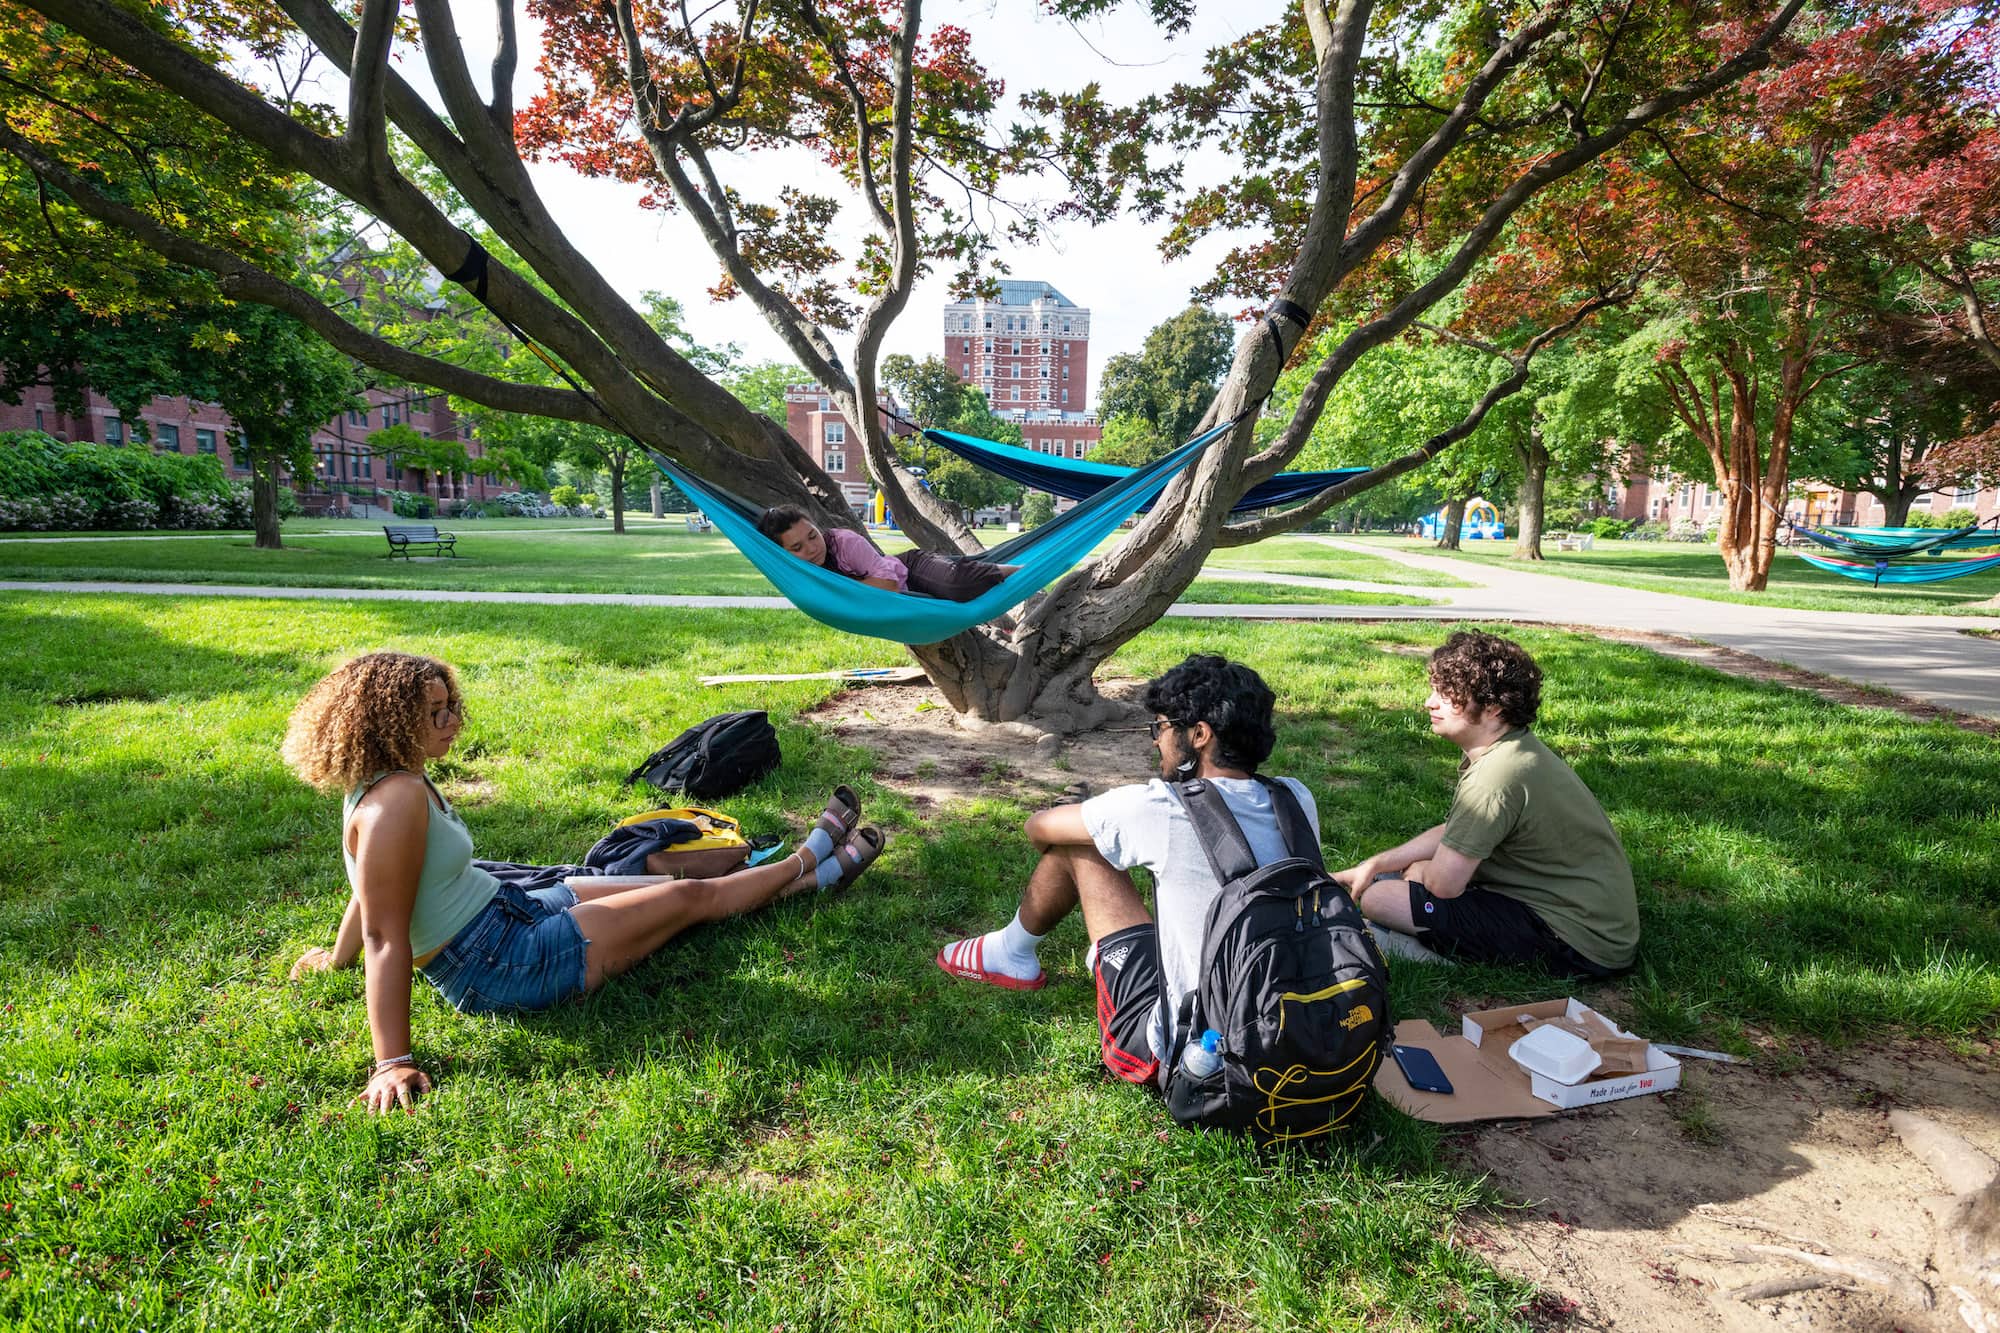 Three students relaxing on a green lawn under a tree.